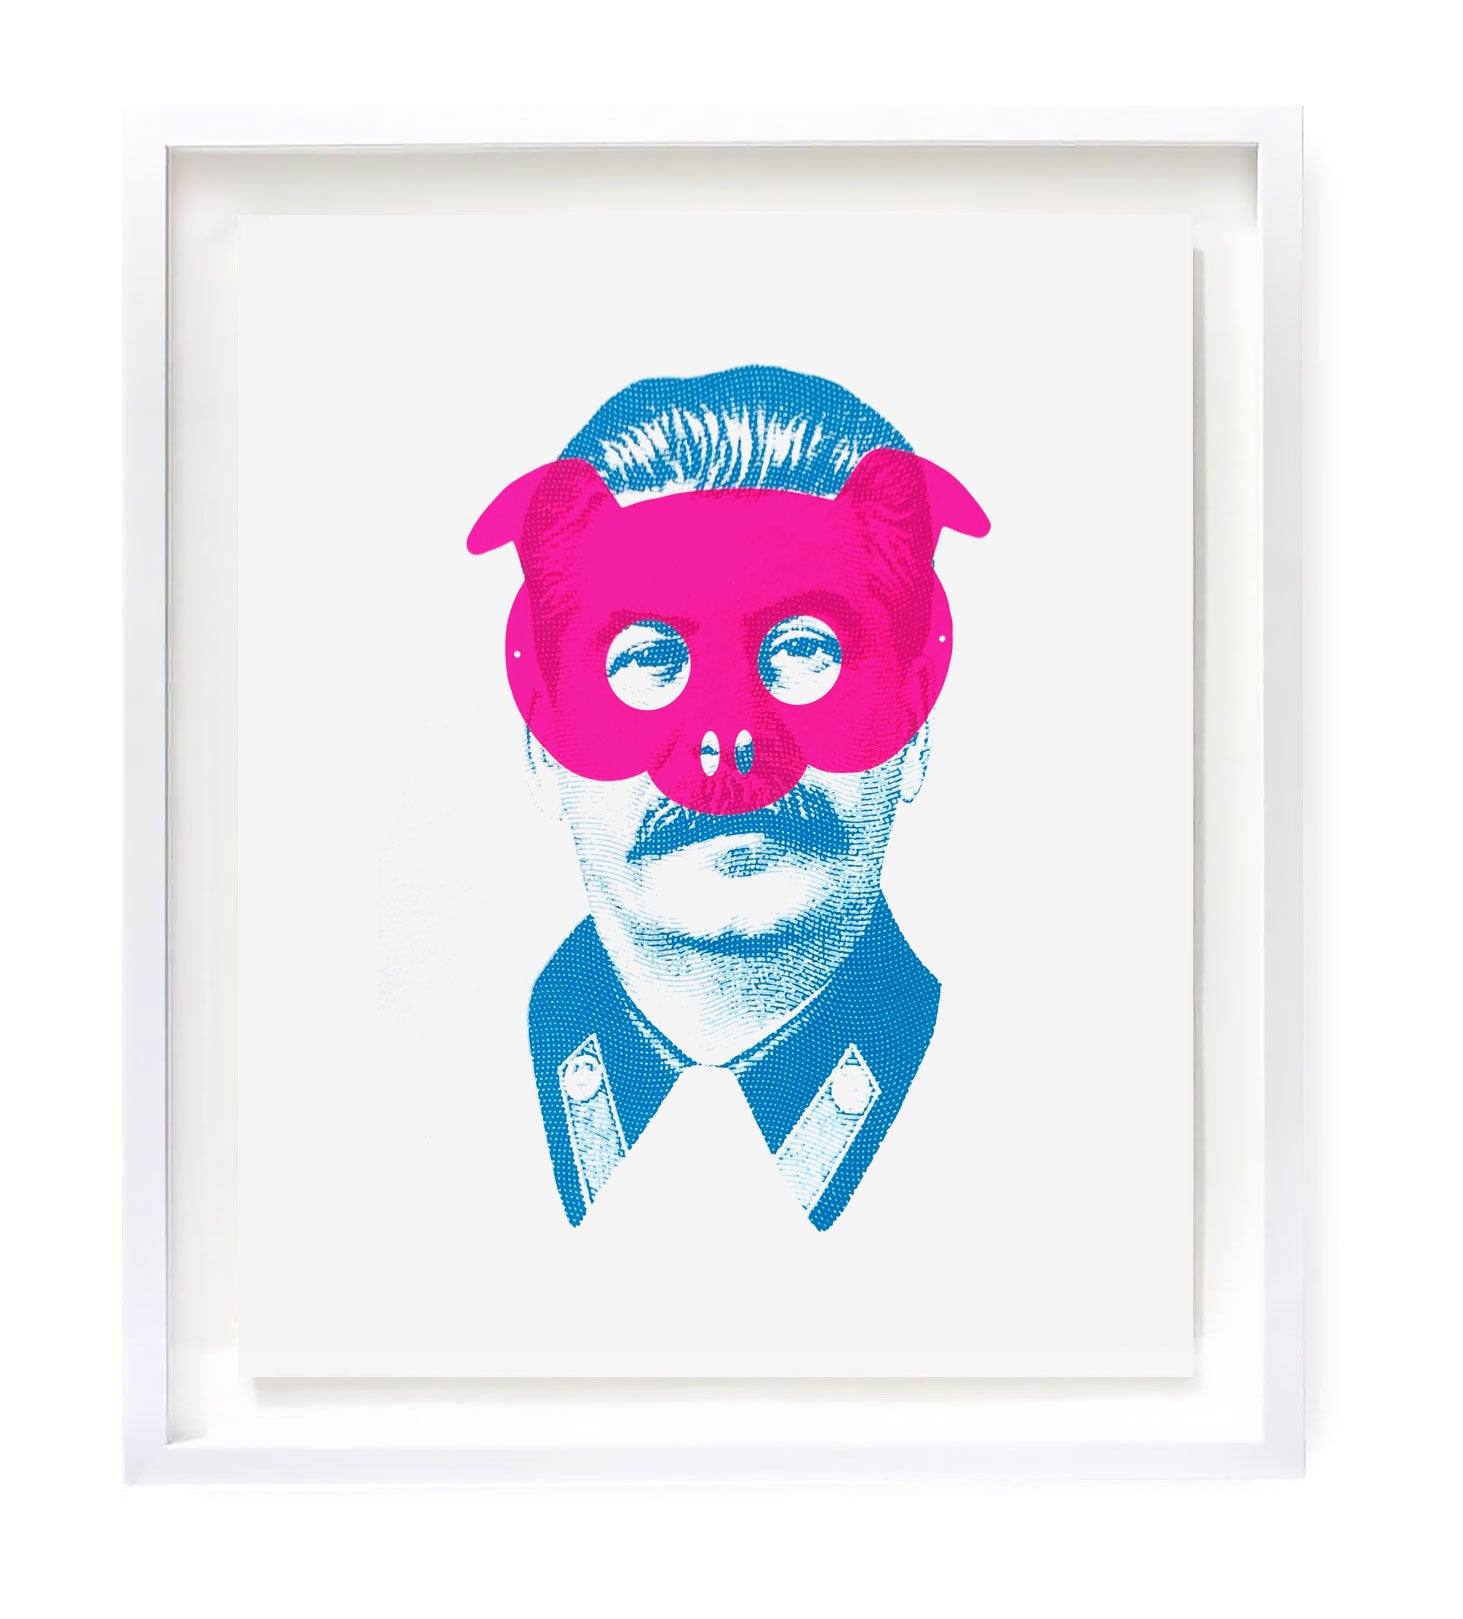 Silkscreen print featuring Stalin wearing pigs mask based on cover artwork by Heath Kane for Penguin Classic Books